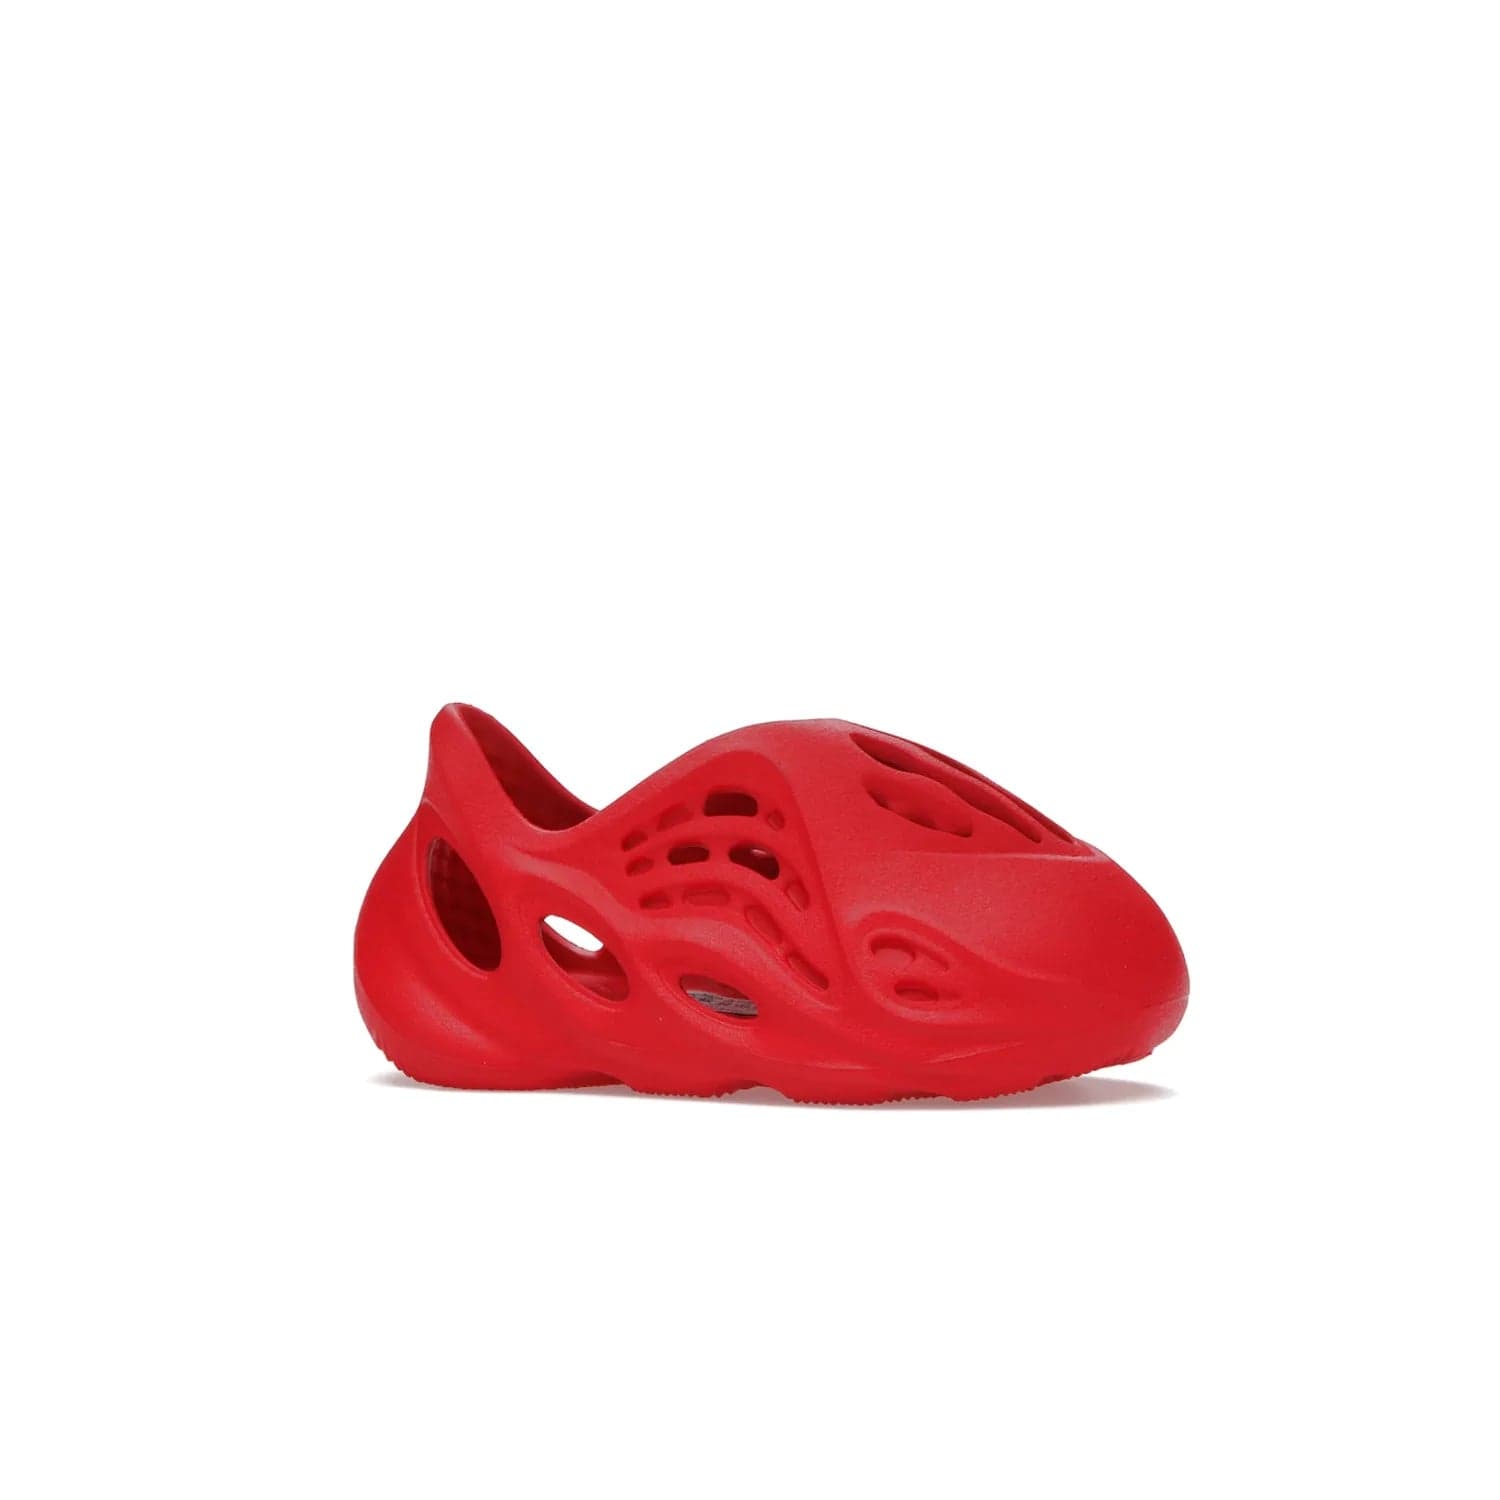 adidas Yeezy Foam RNNR Vermillion (Infants) - Image 3 - Only at www.BallersClubKickz.com - Adidas Yeezy Foam RNNR Vermillion (Infants) brings a vibrant monochromatic design and lightweight foam material to keep feet in optimal comfort. Signature details provide a finishing touch of flair.